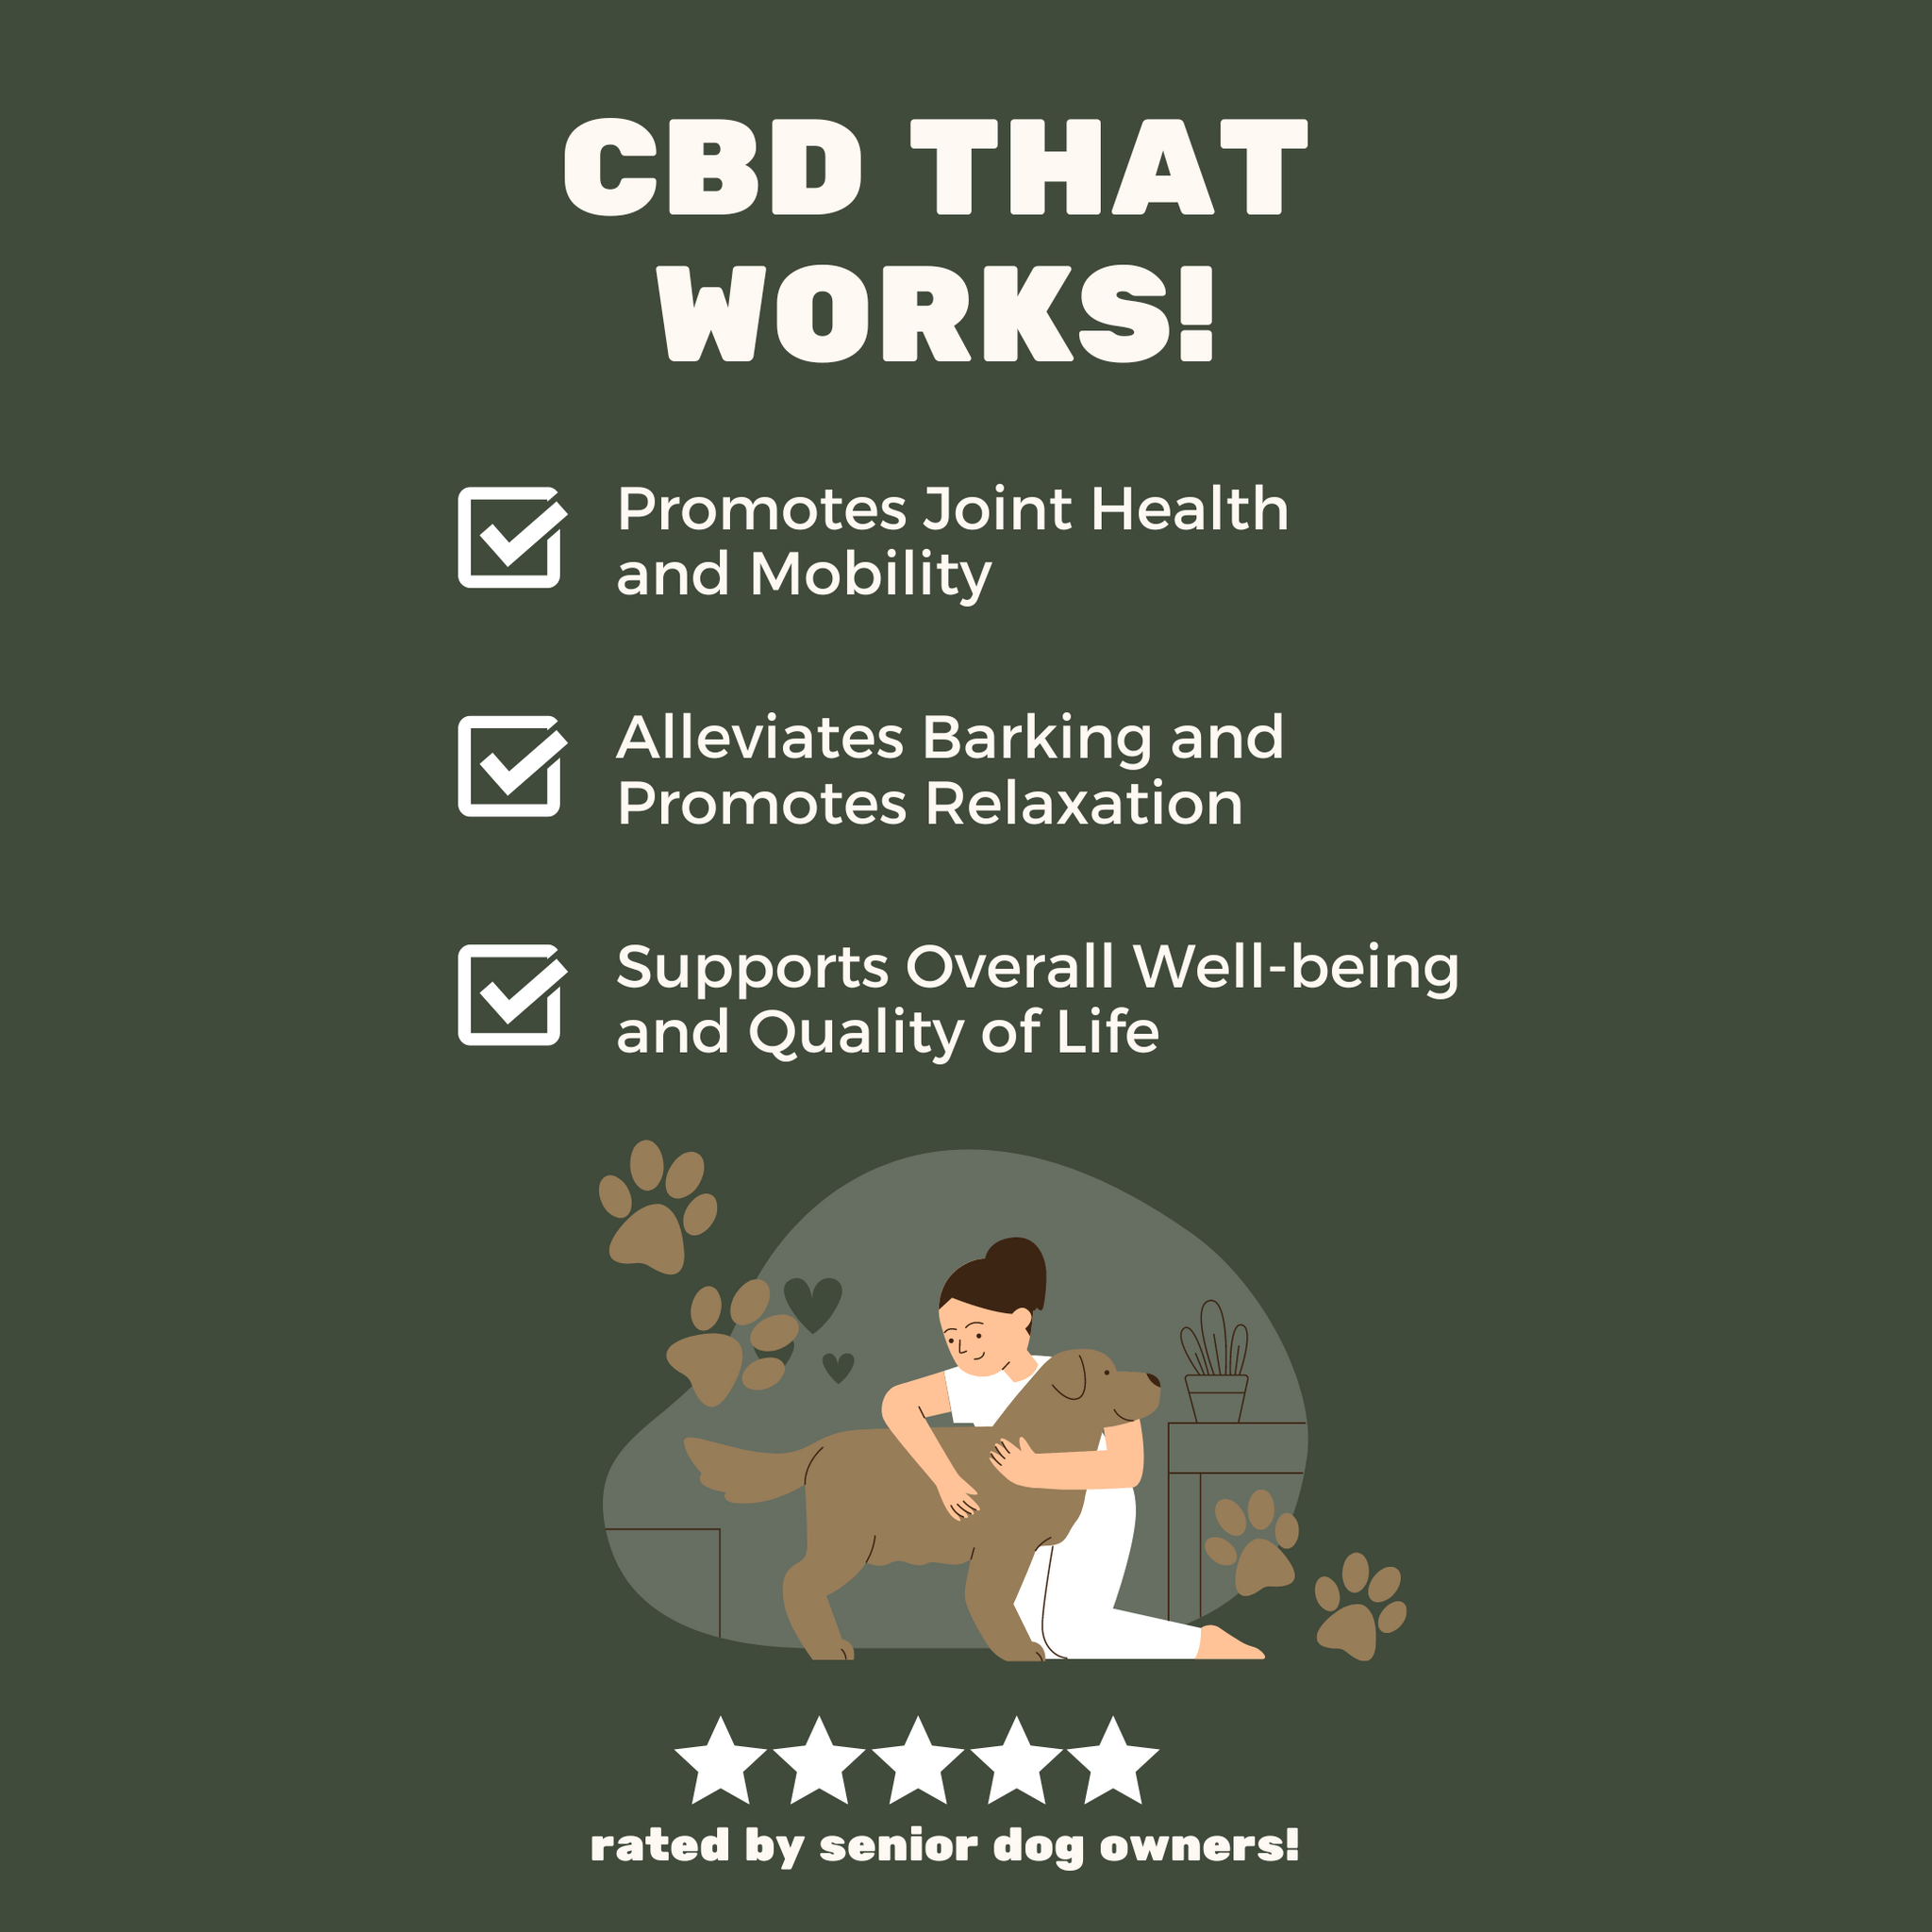 SUPER Wild Salmon CBD Oil - 4 oz - 4,000 mg! Healthy Hips & Joints Care Formula CBD for dogs and cats